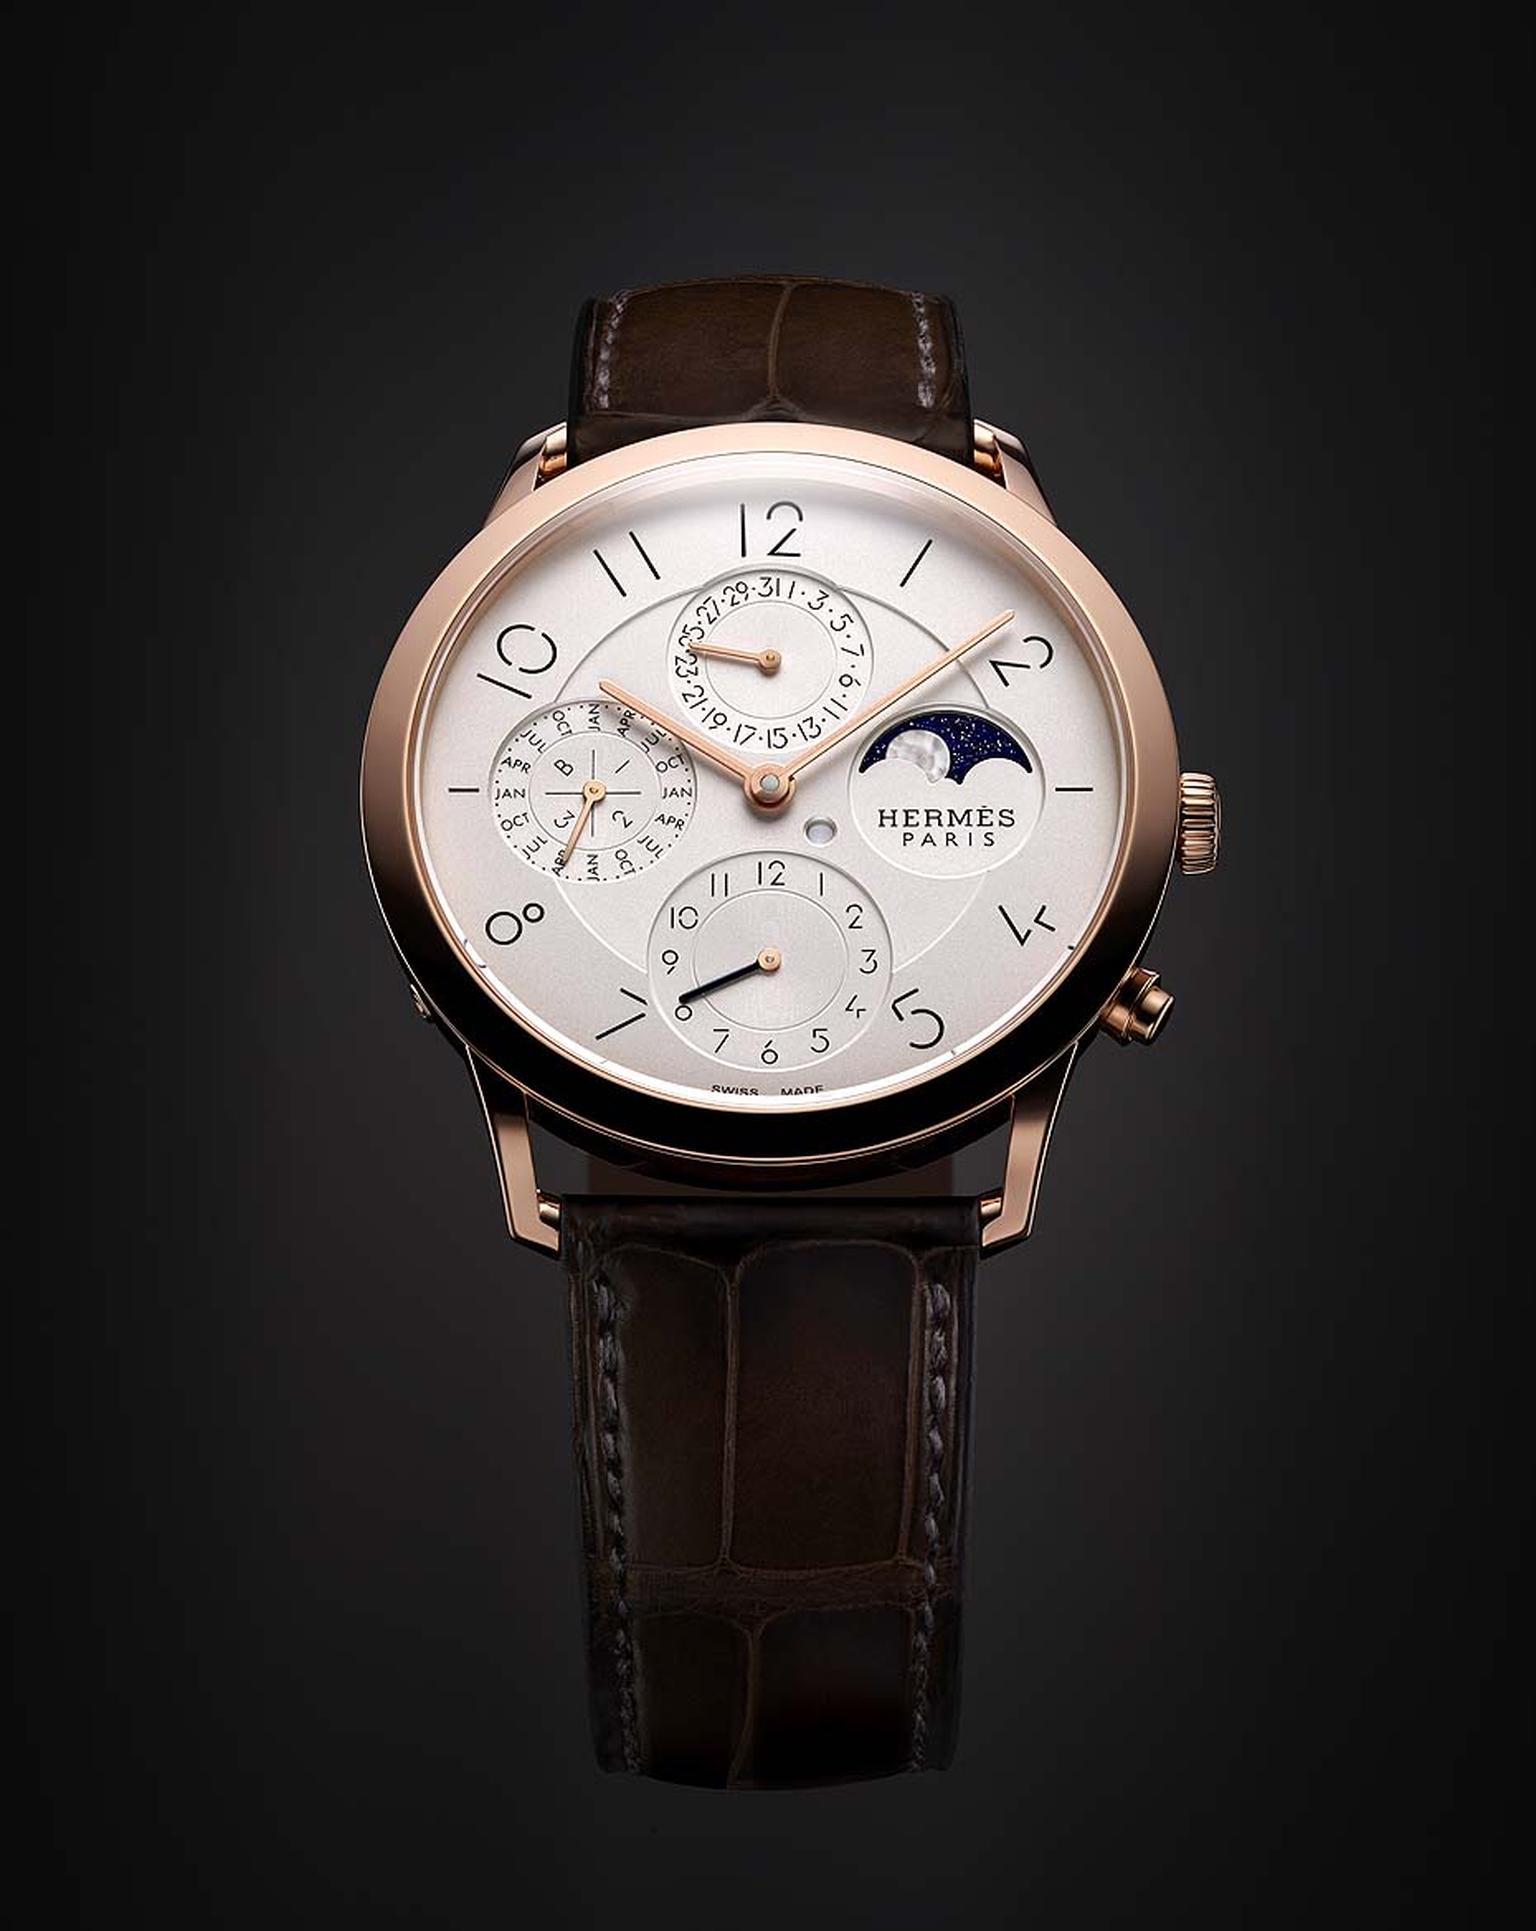 The elegant new Slim d'Hermès collection includes a perpetual calendar men's watch and a Moon phase function in milky mother-of-pearl set against an aventurine glass sky.